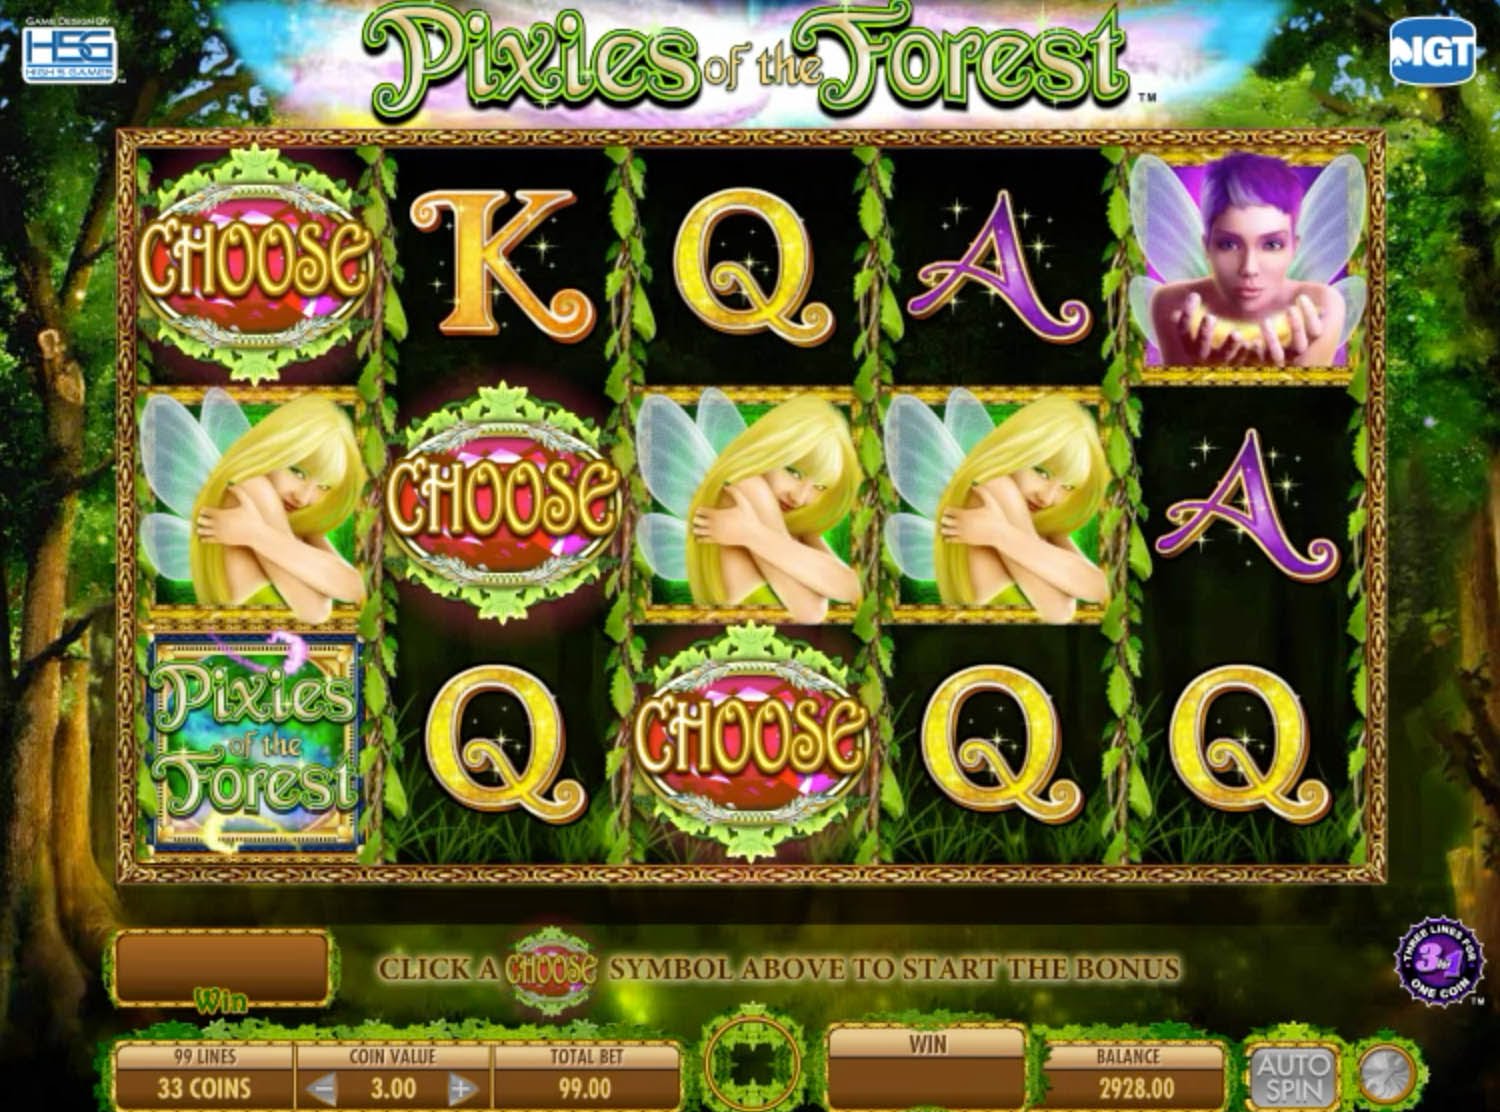 Free pixies of the forest slot machine free play